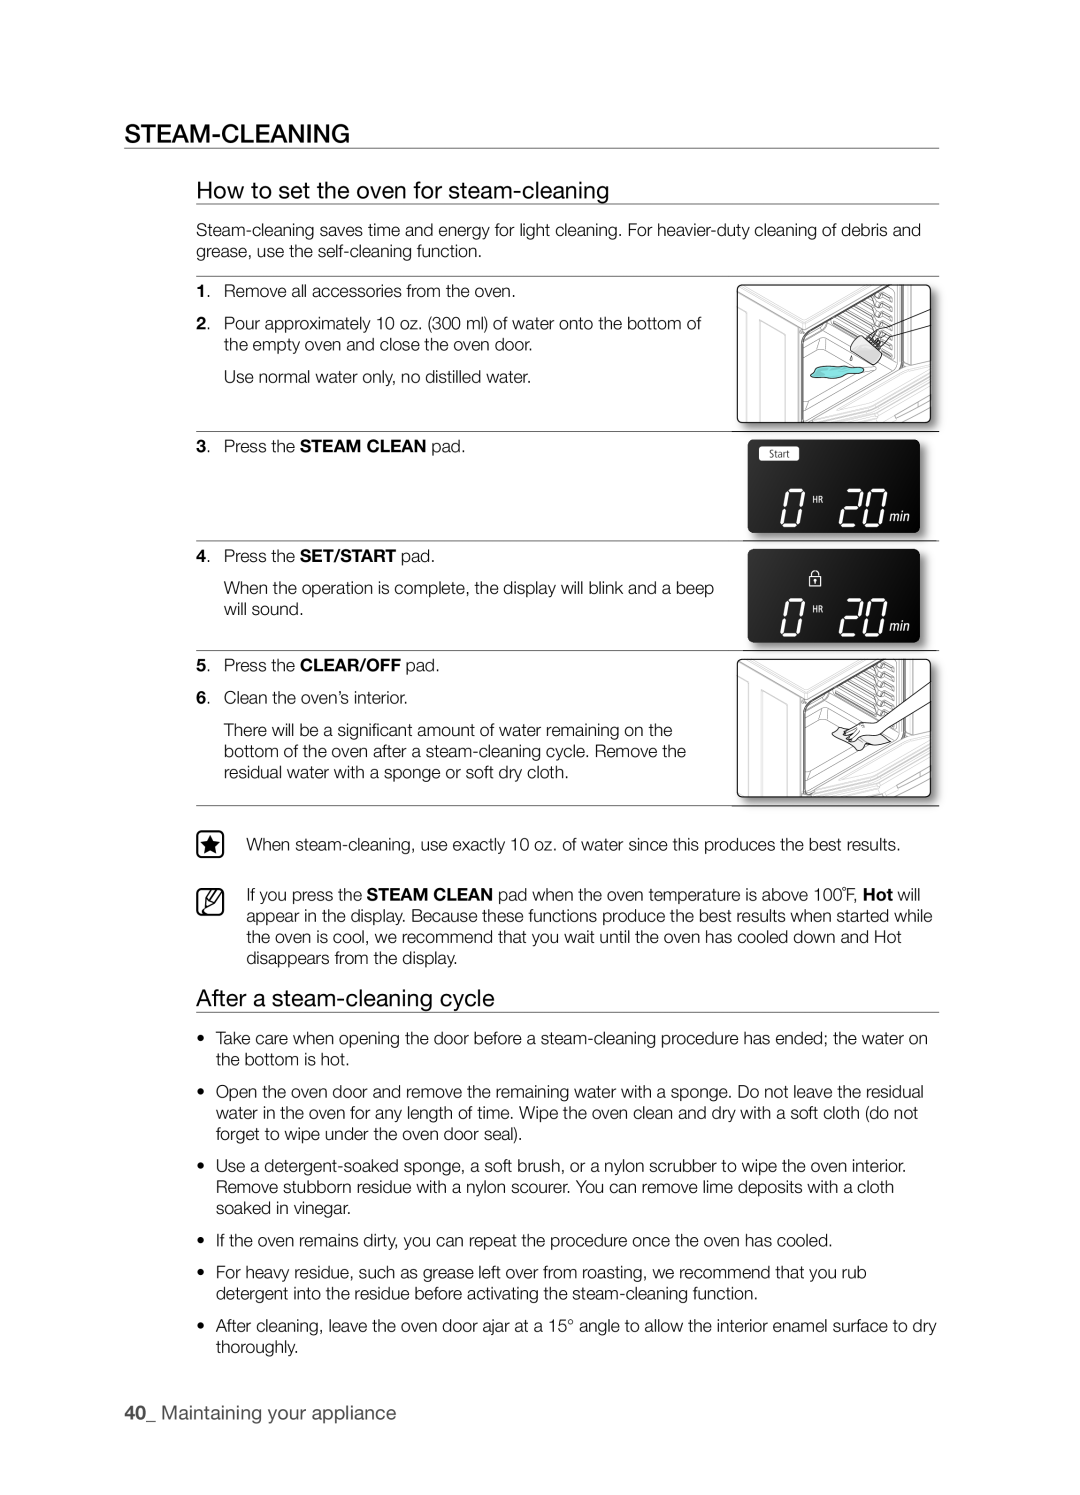 Samsung FTQ352IWX user manual Steam-Cleaning, How to set the oven for steam-cleaning, After a steam-cleaningcycle 